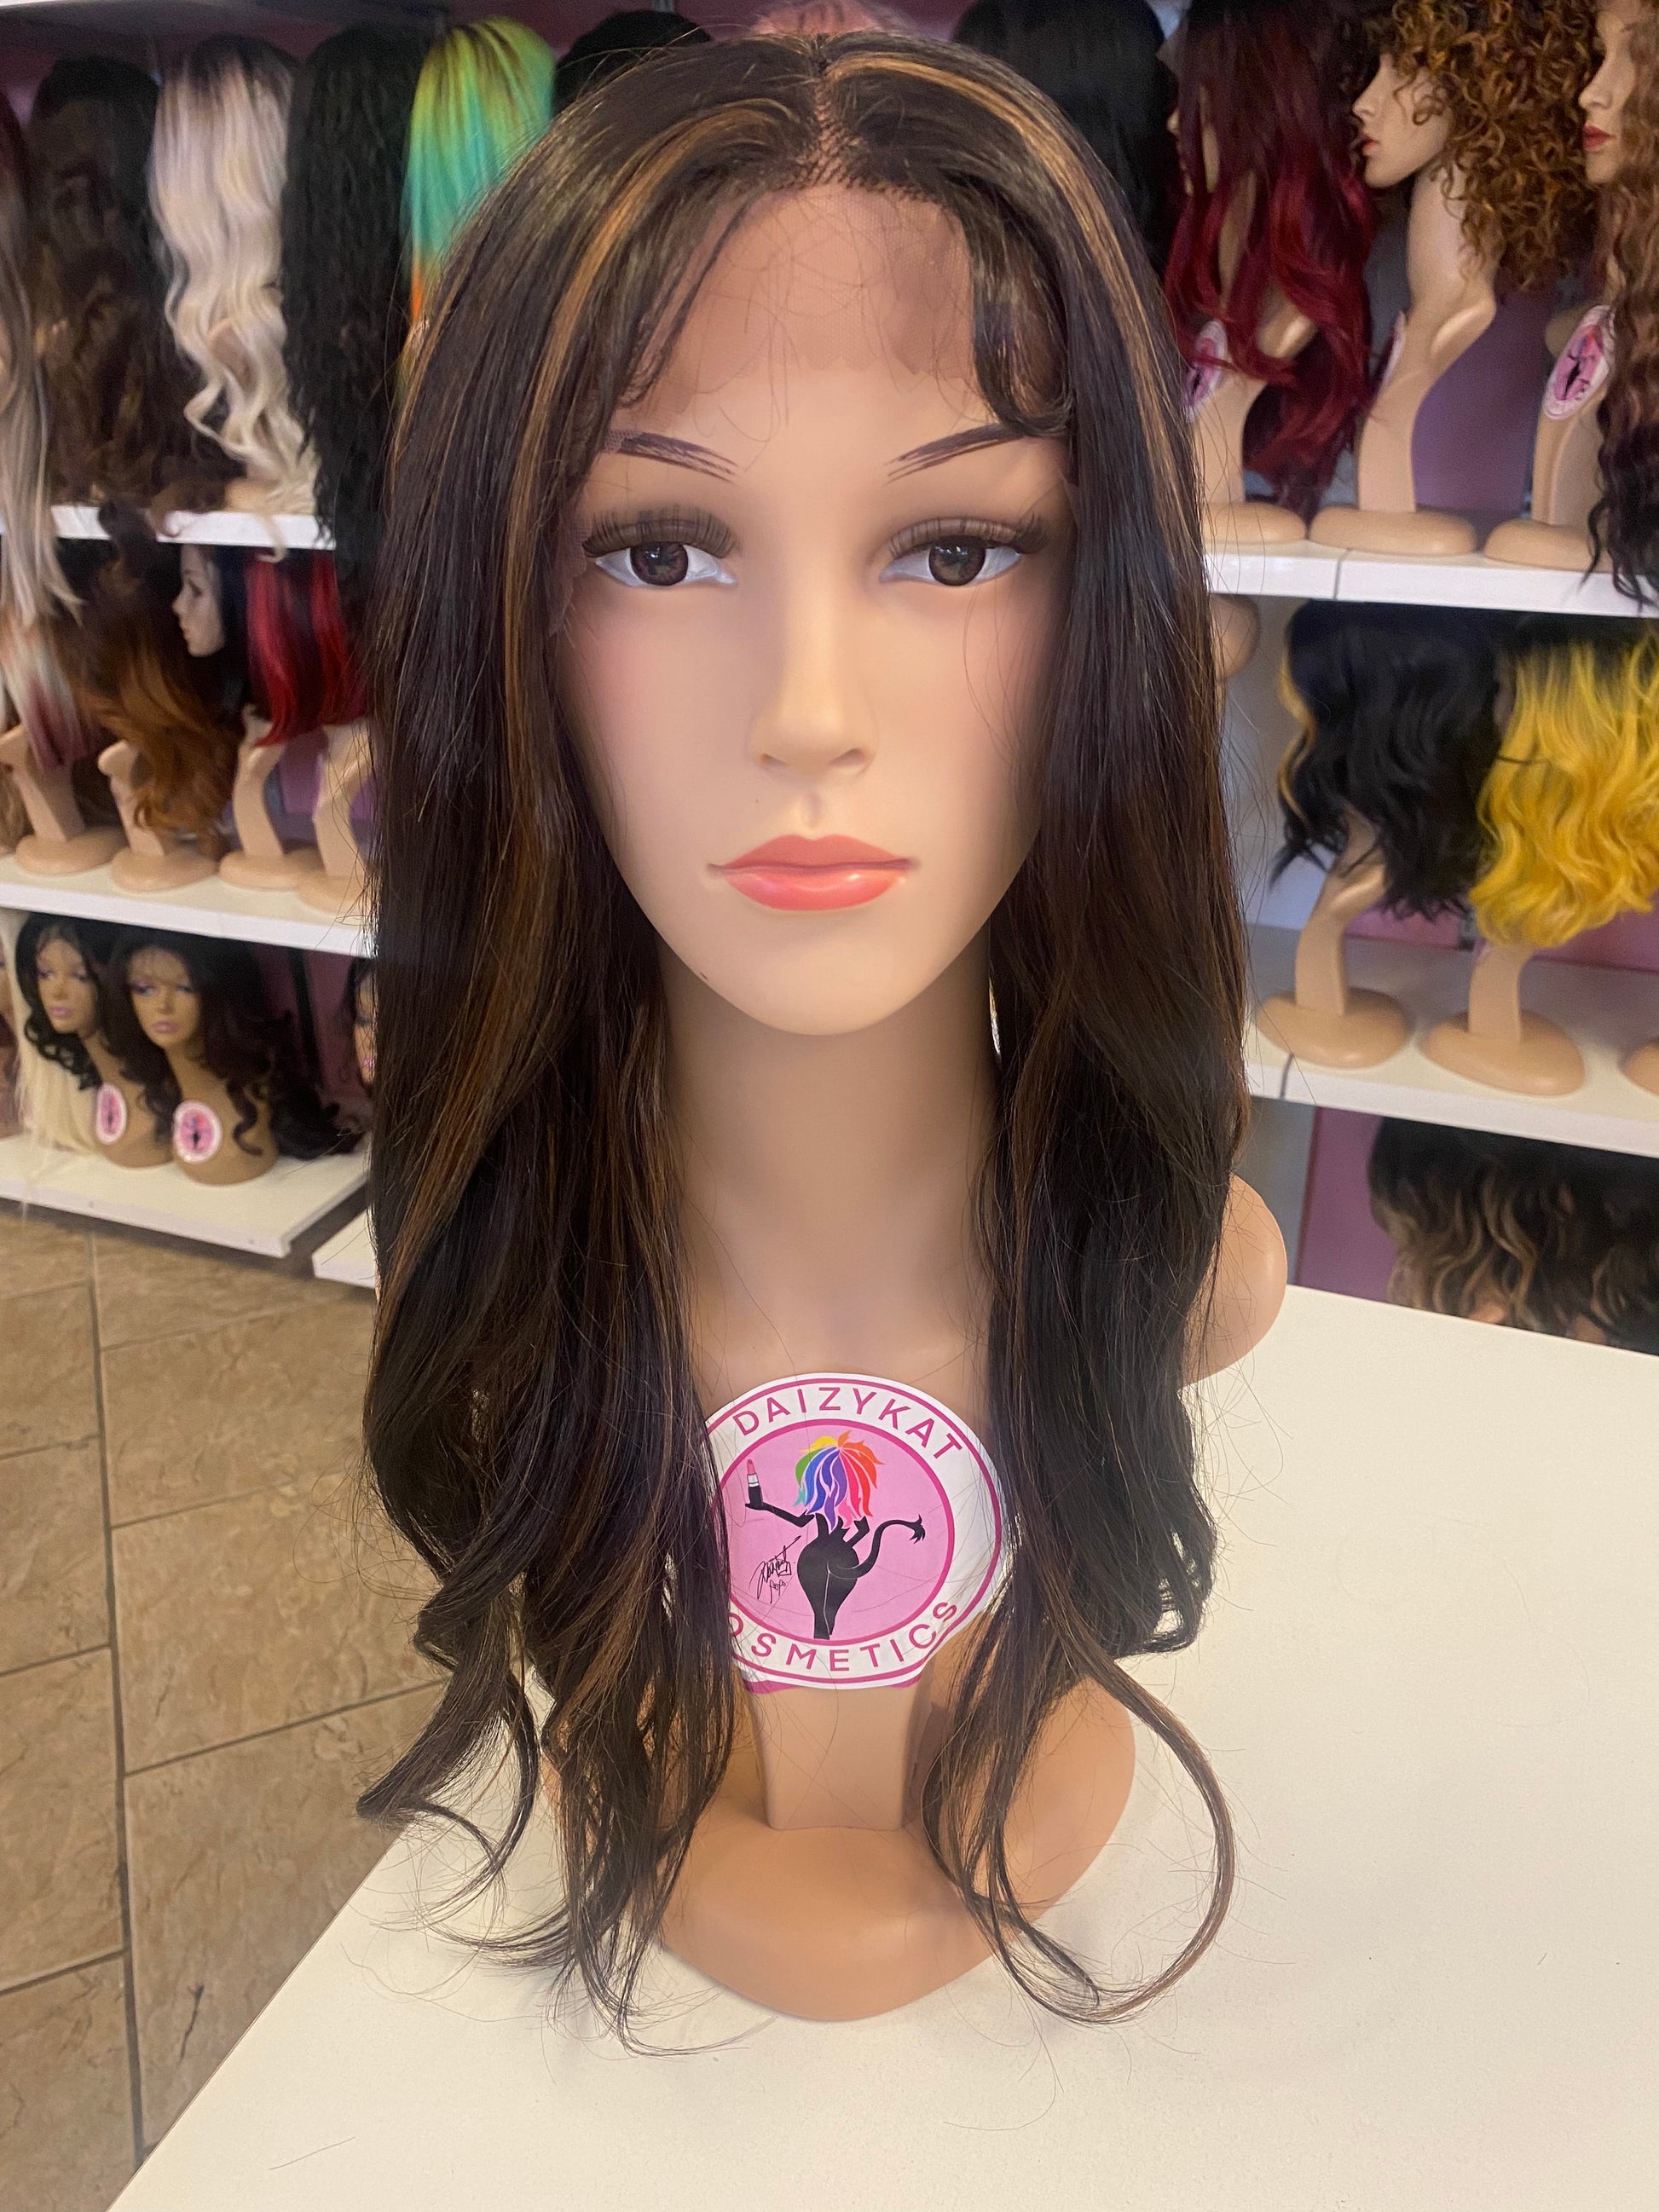 472 Harper - Middle Part Lace Front Wig - 4/27 - DaizyKat Cosmetics 472 Harper - Middle Part Lace Front Wig - 4/27 DaizyKat Cosmetics Wigs